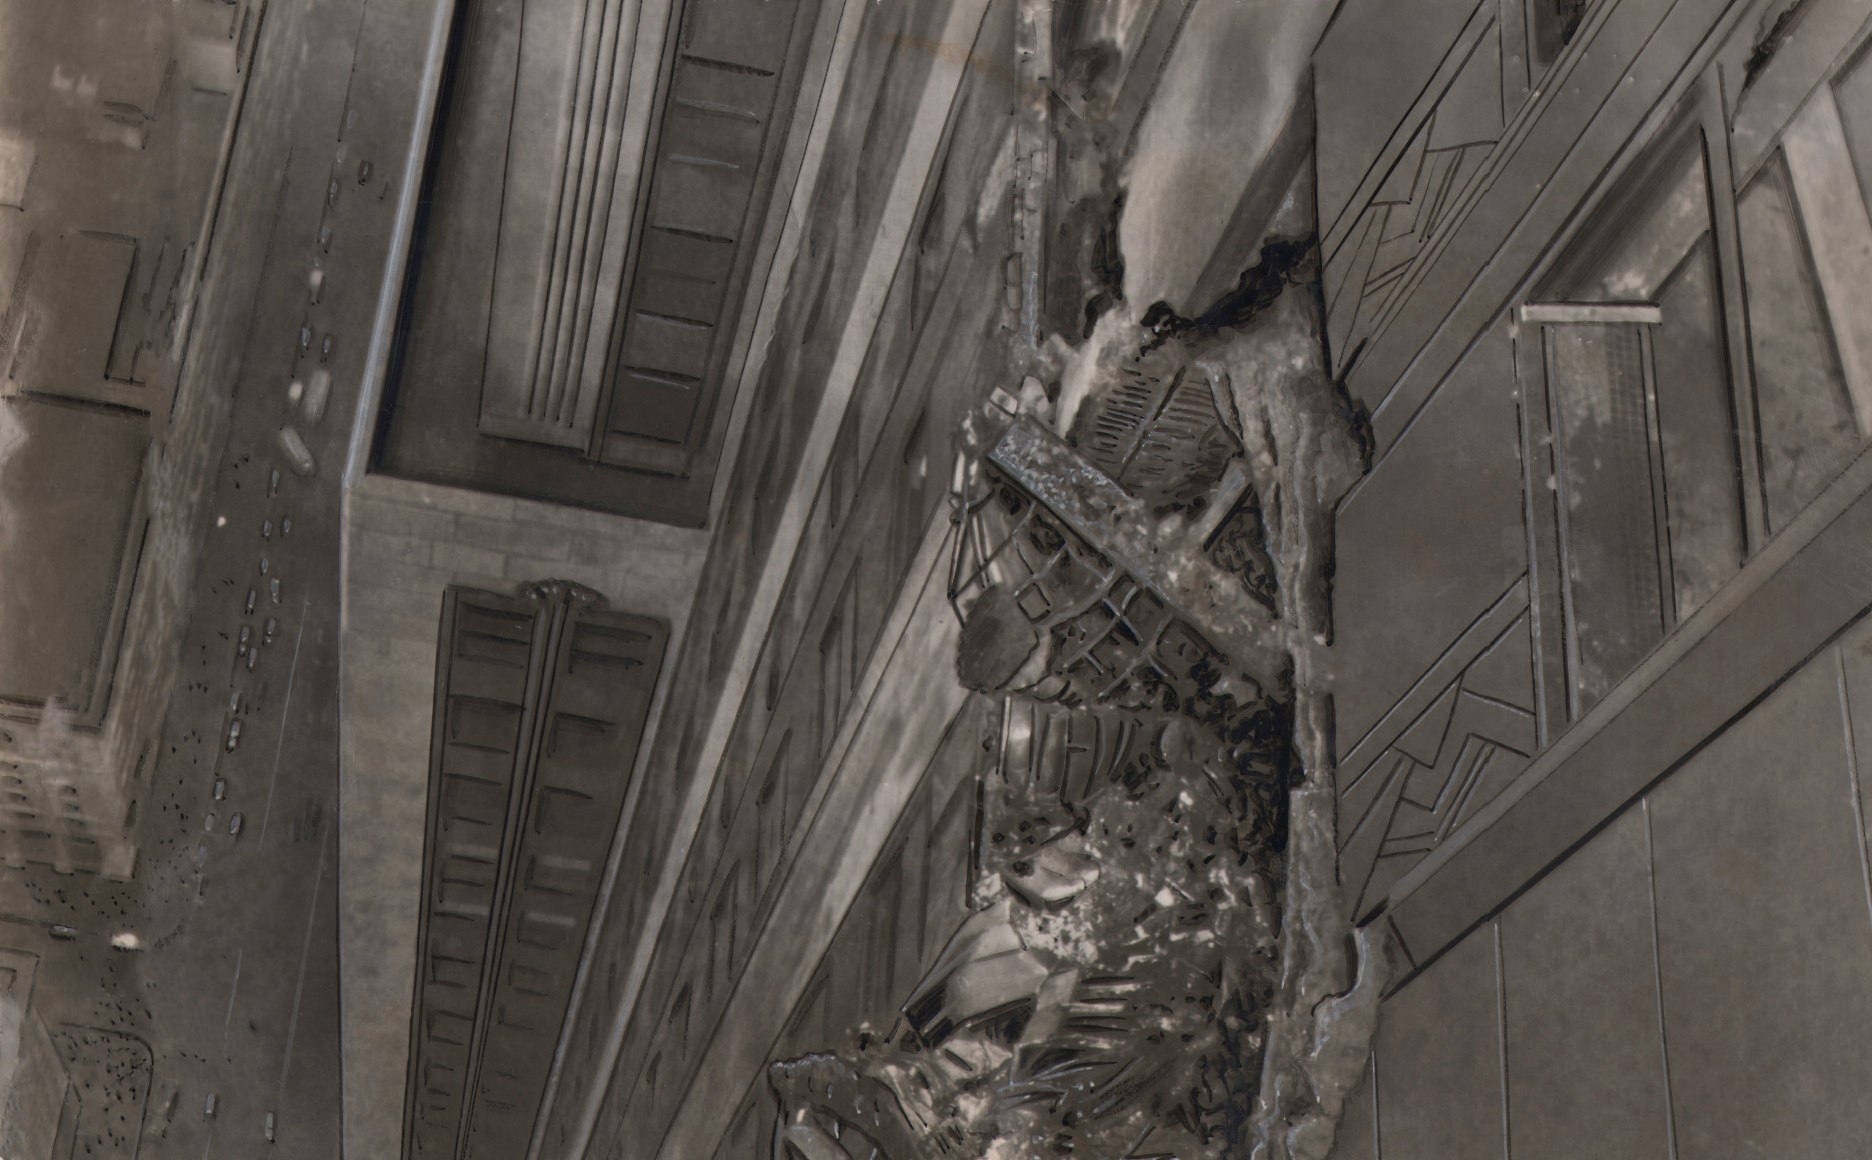 01. AP Wirephoto, Where bomber crashed into Empire State Building, 1945. Looking-down detail of damaged building facade with street below visible in left of frame.